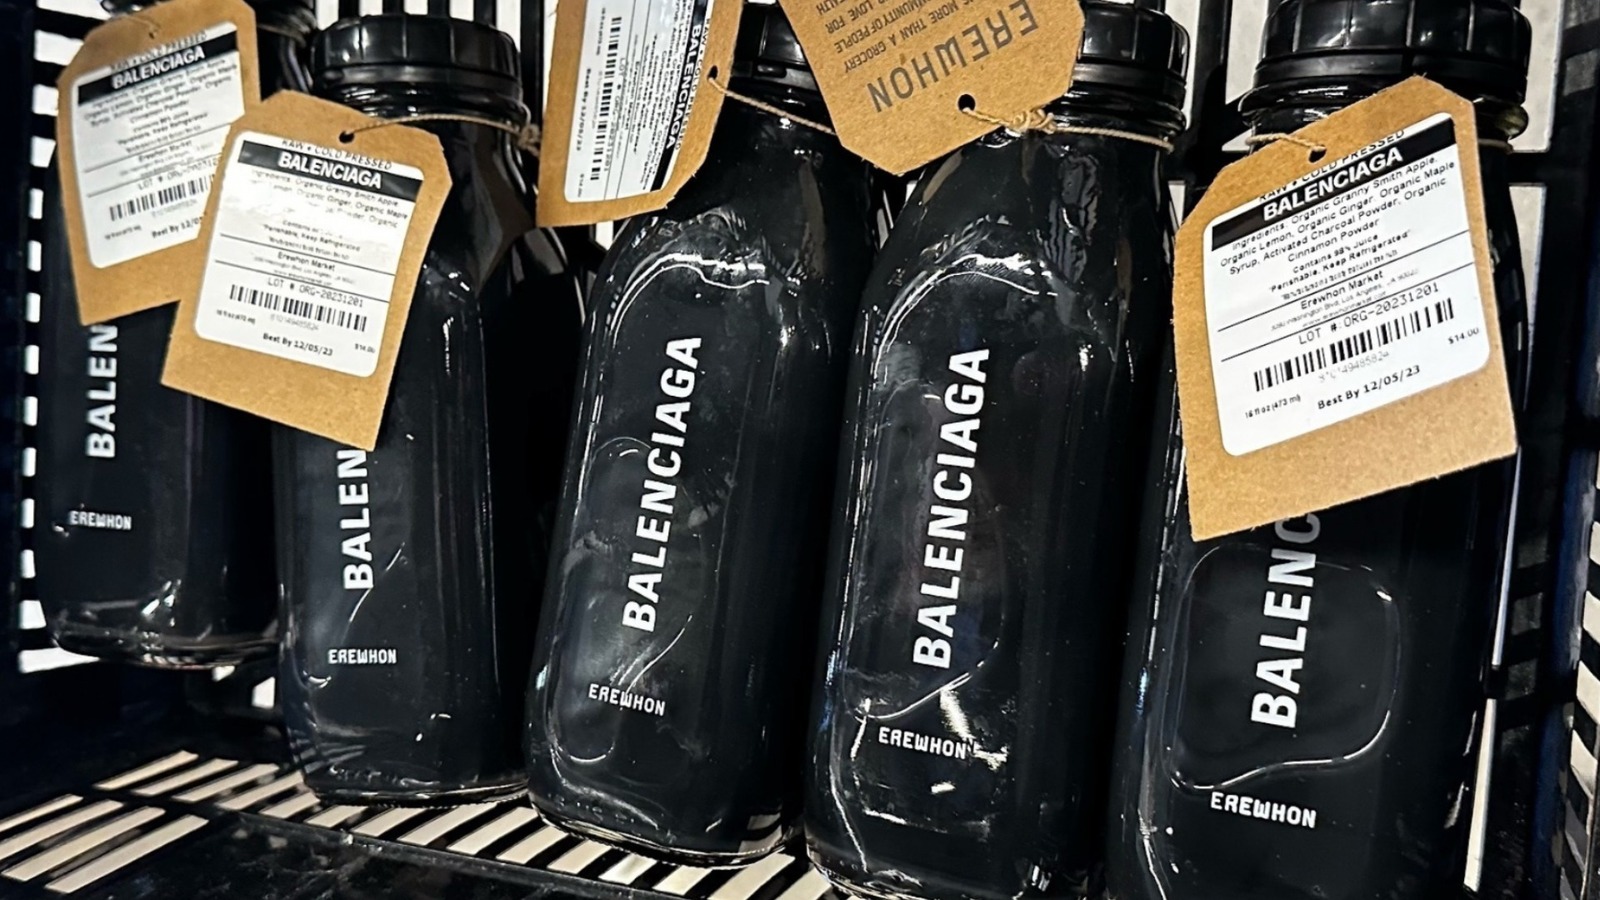 Erewhon And Balenciaga Team Up For A Limited-Time Juice And Merch